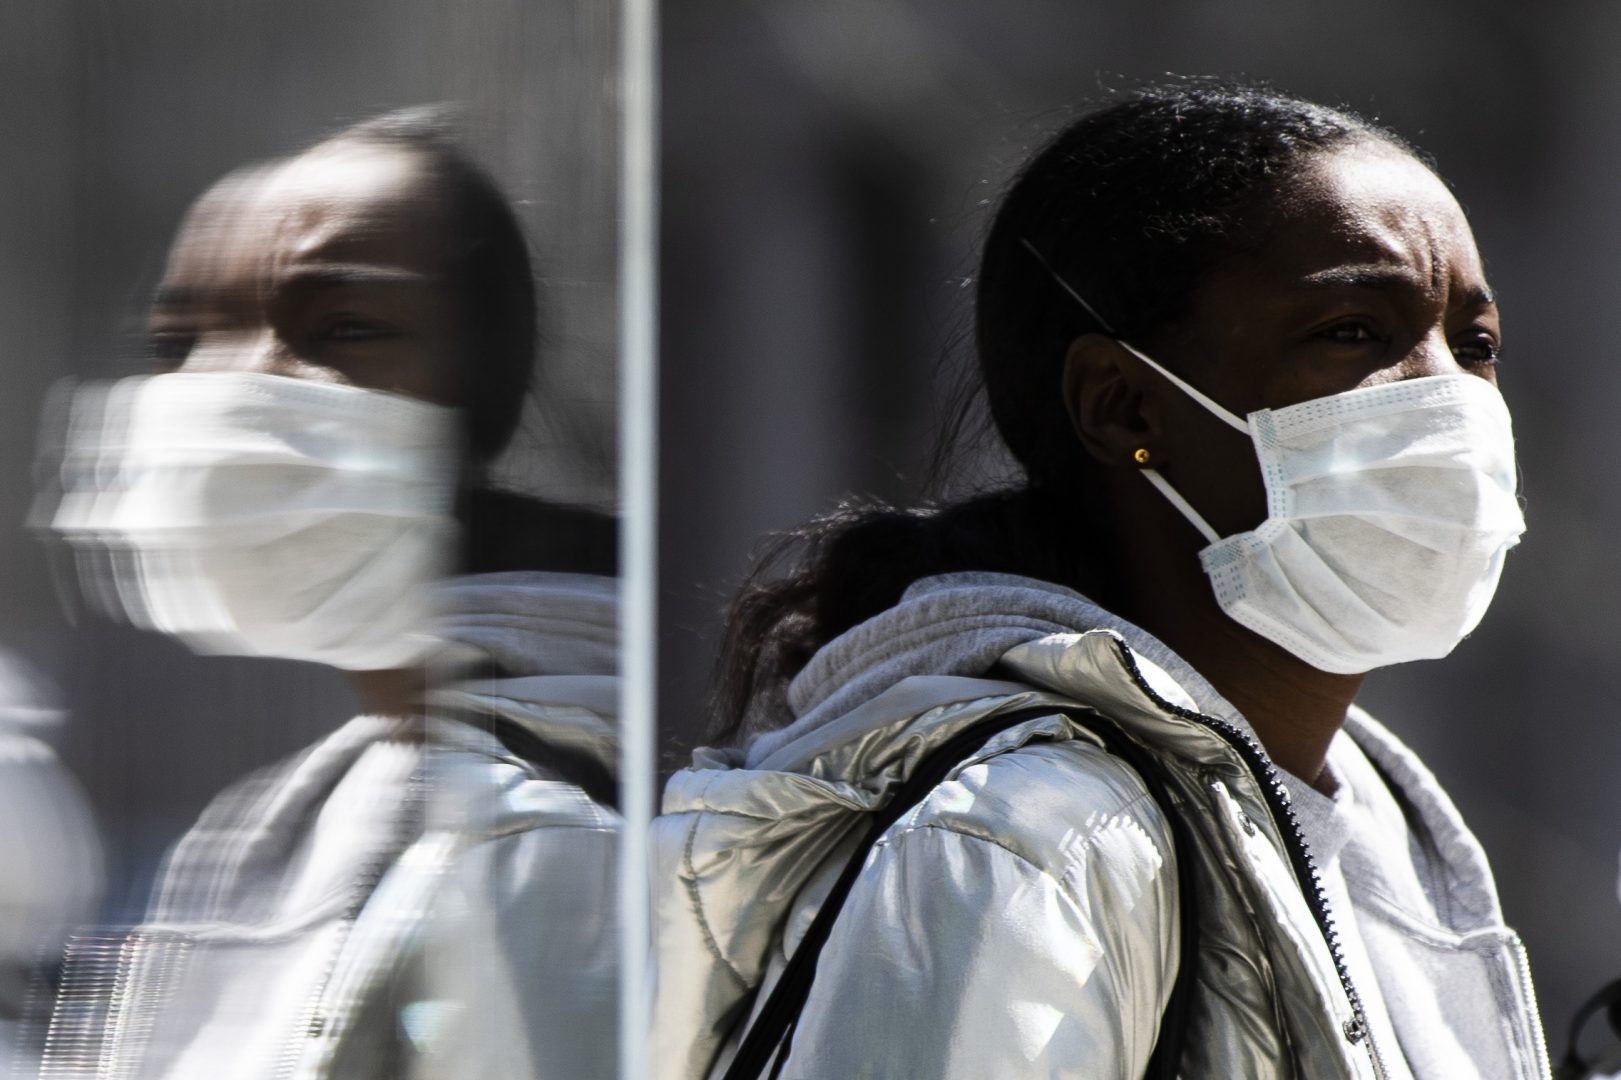 A person wearing protective masks due to coronavirus concerns walks in Philadelphia, Thursday, April 2, 2020.